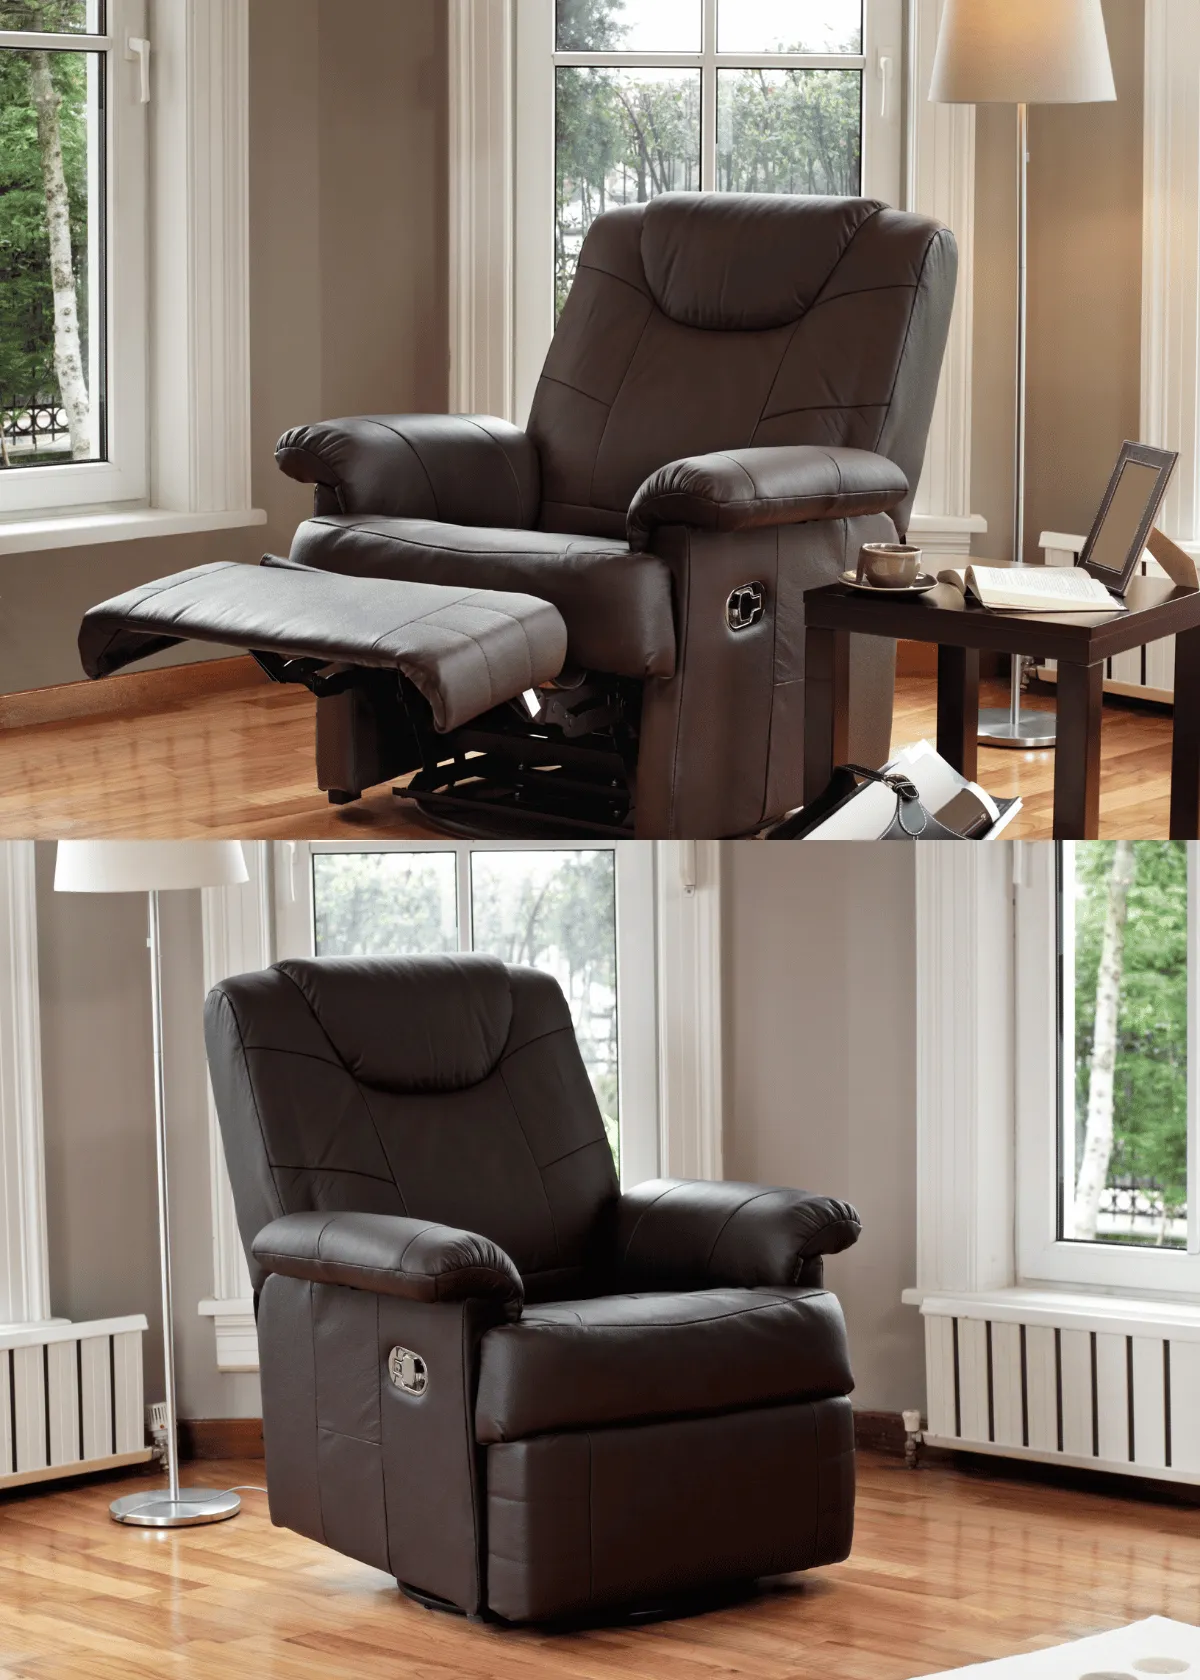 "Best Lazy Boy Recliners For Sleeping"